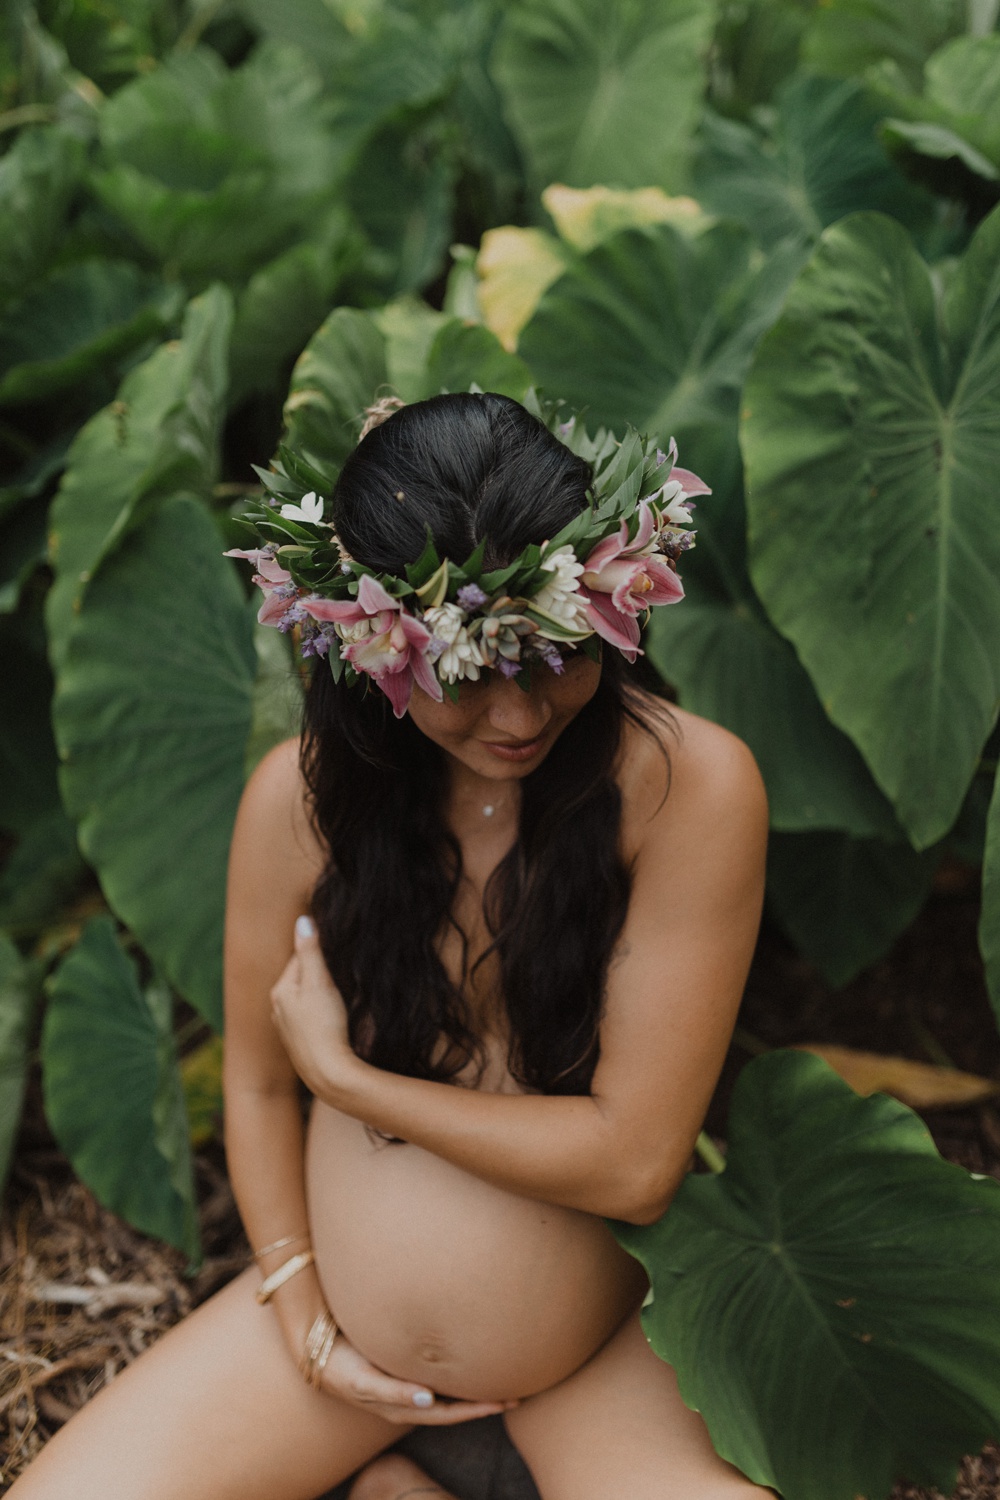 shanel in the taro during her maternity photography session in lahaina